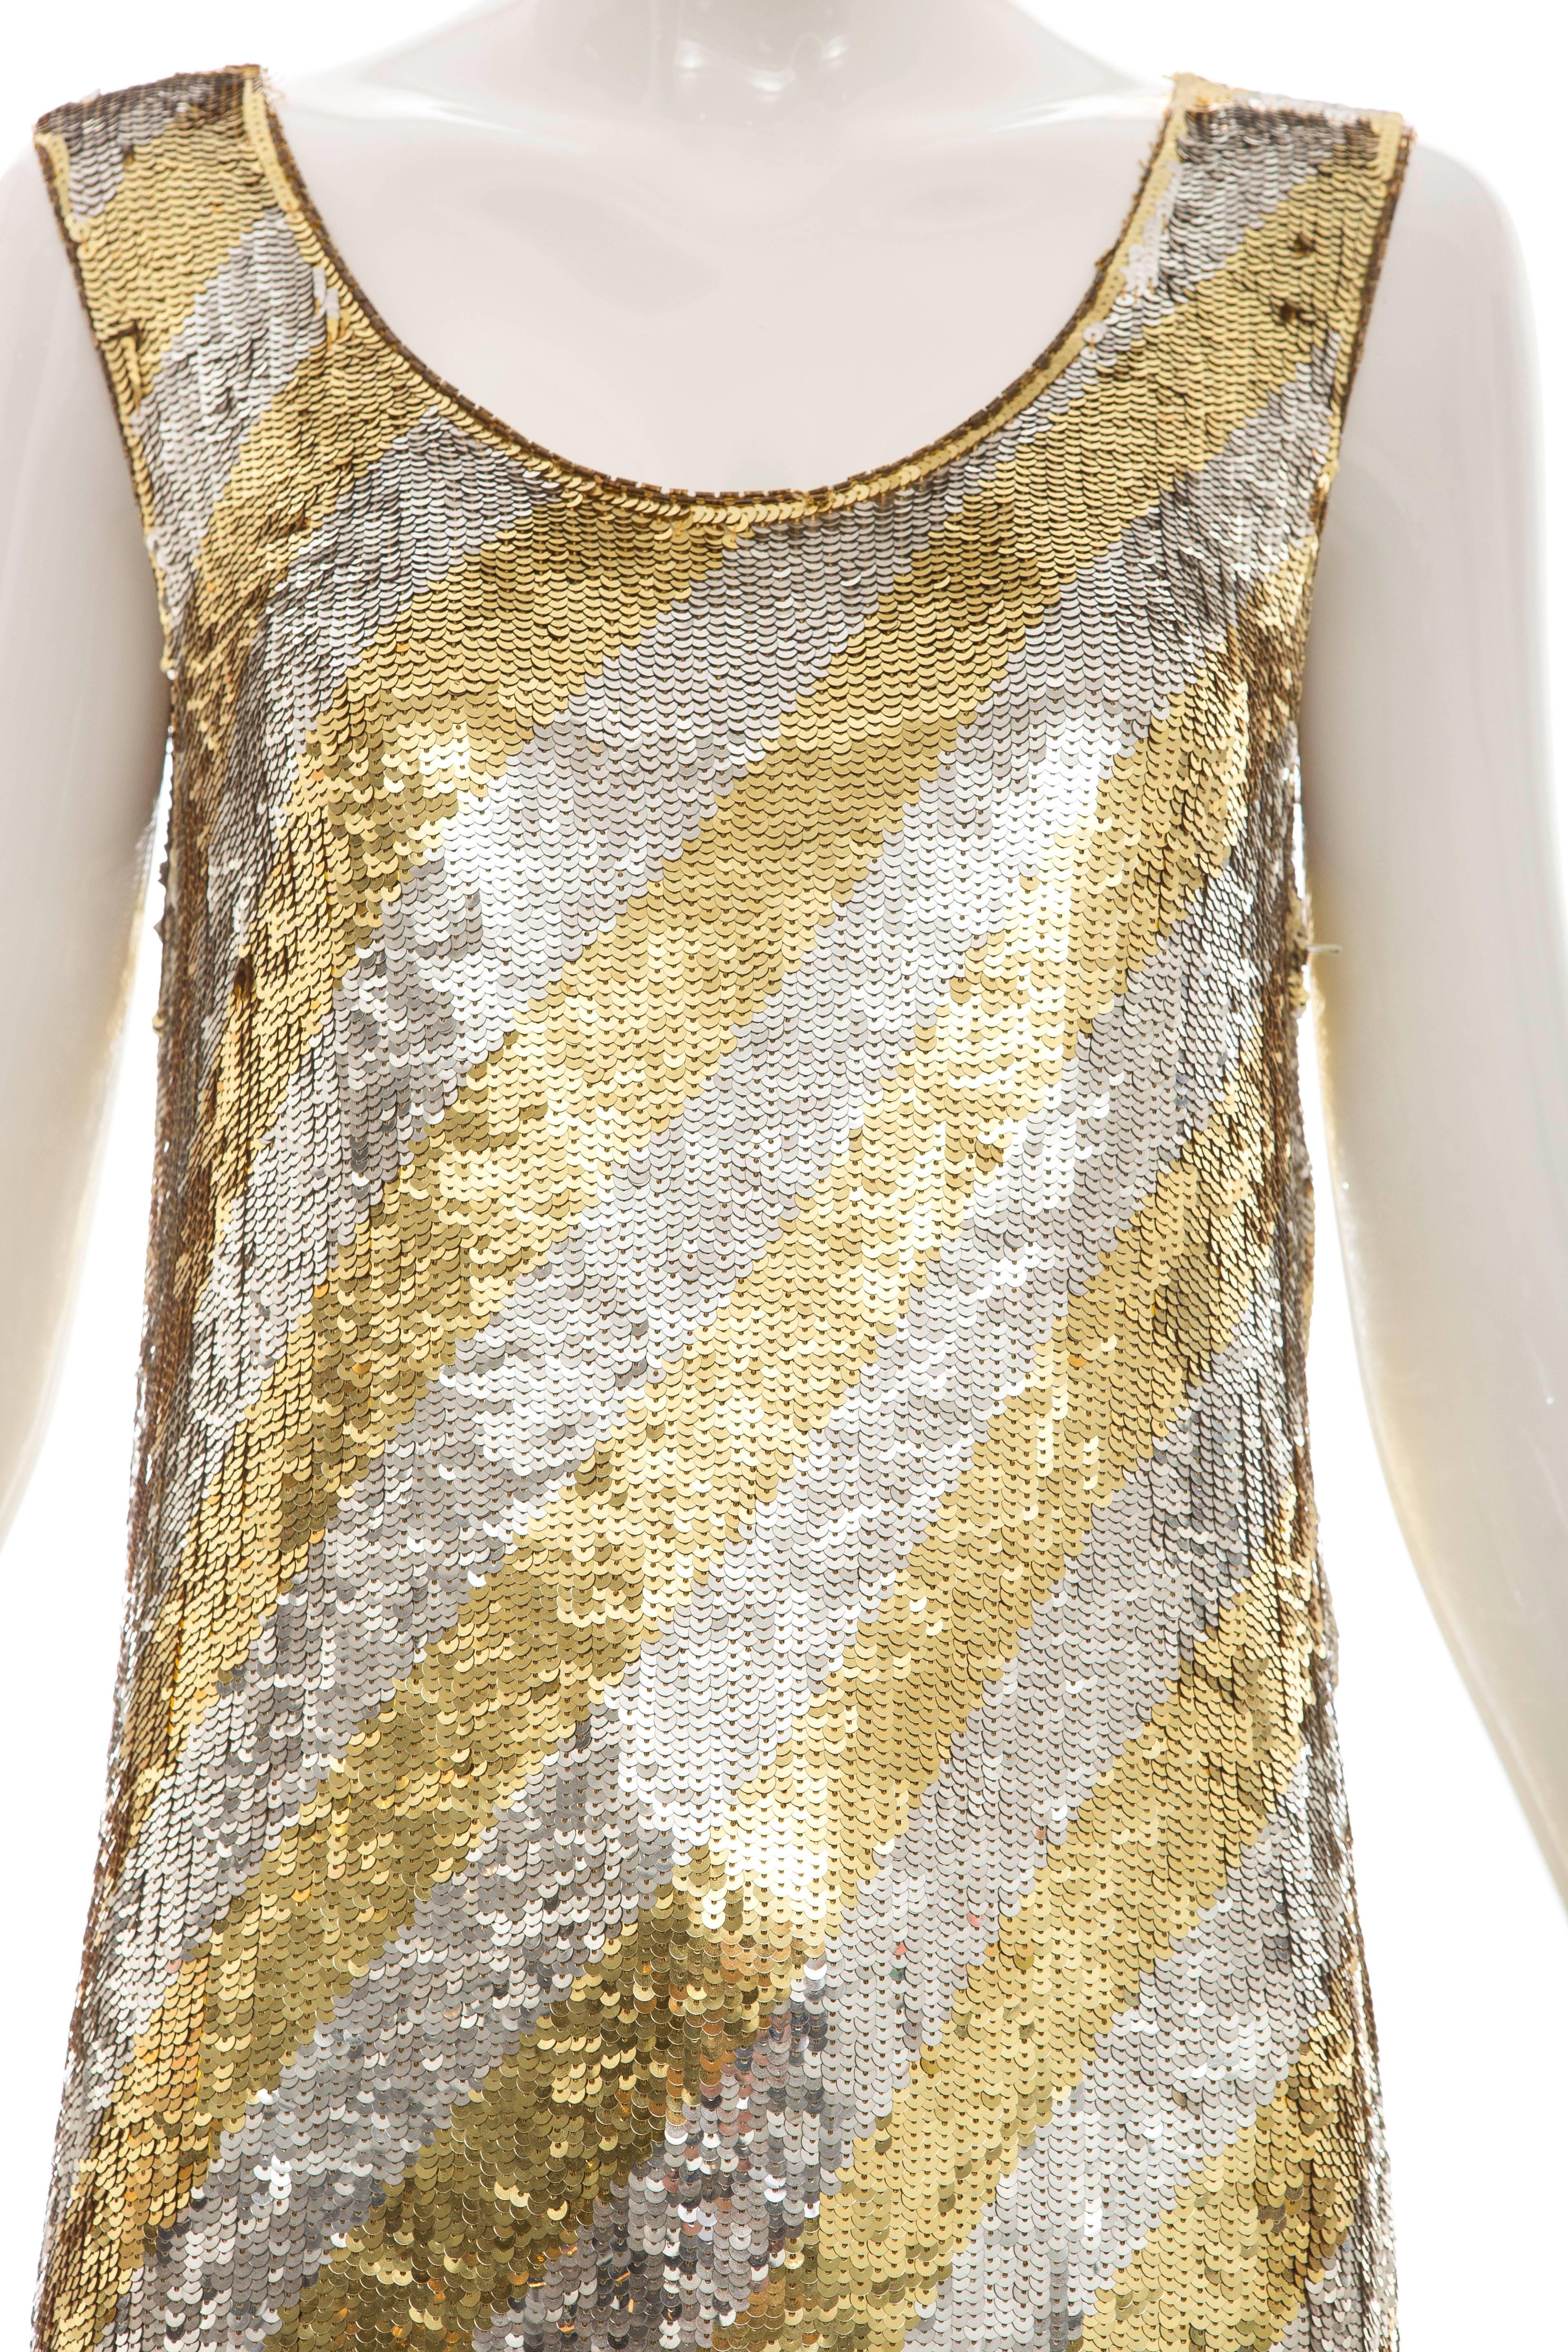 Women's  Marc Bohan for Christian Dior Embroidered Sequin Dress, Circa 1970s For Sale